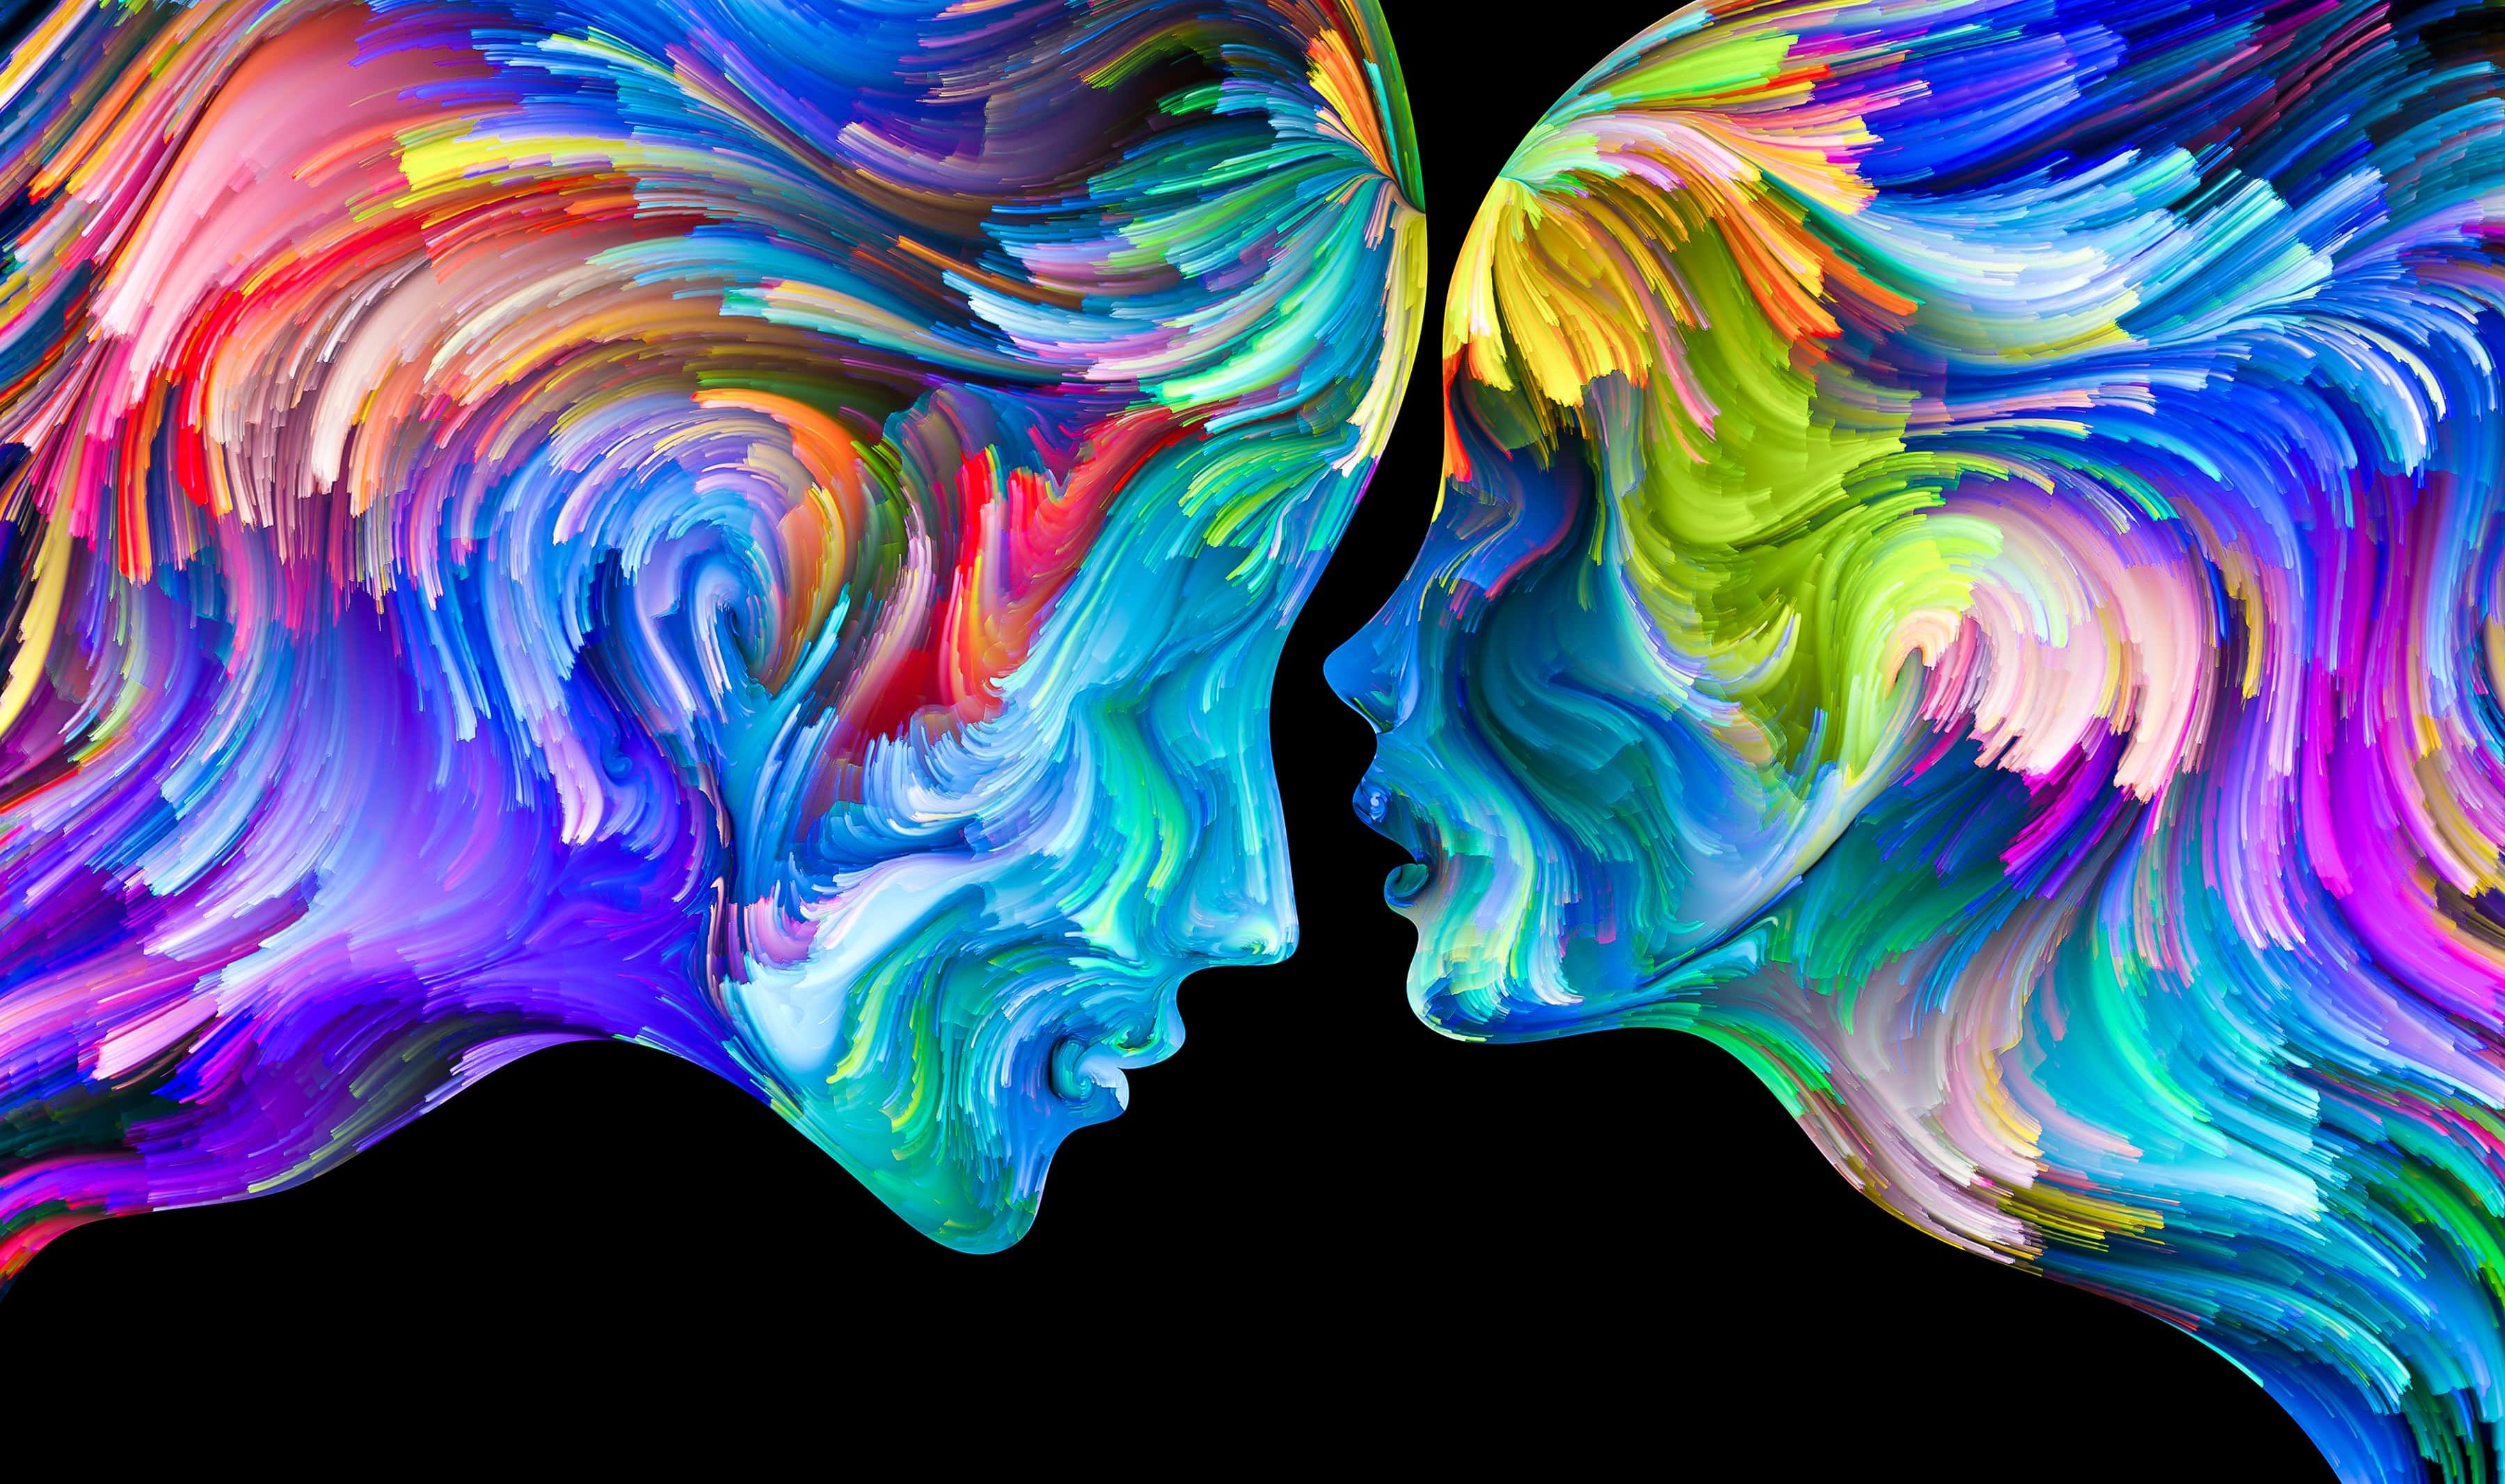 Developing Empathy – Can you walk in another’s shoes?